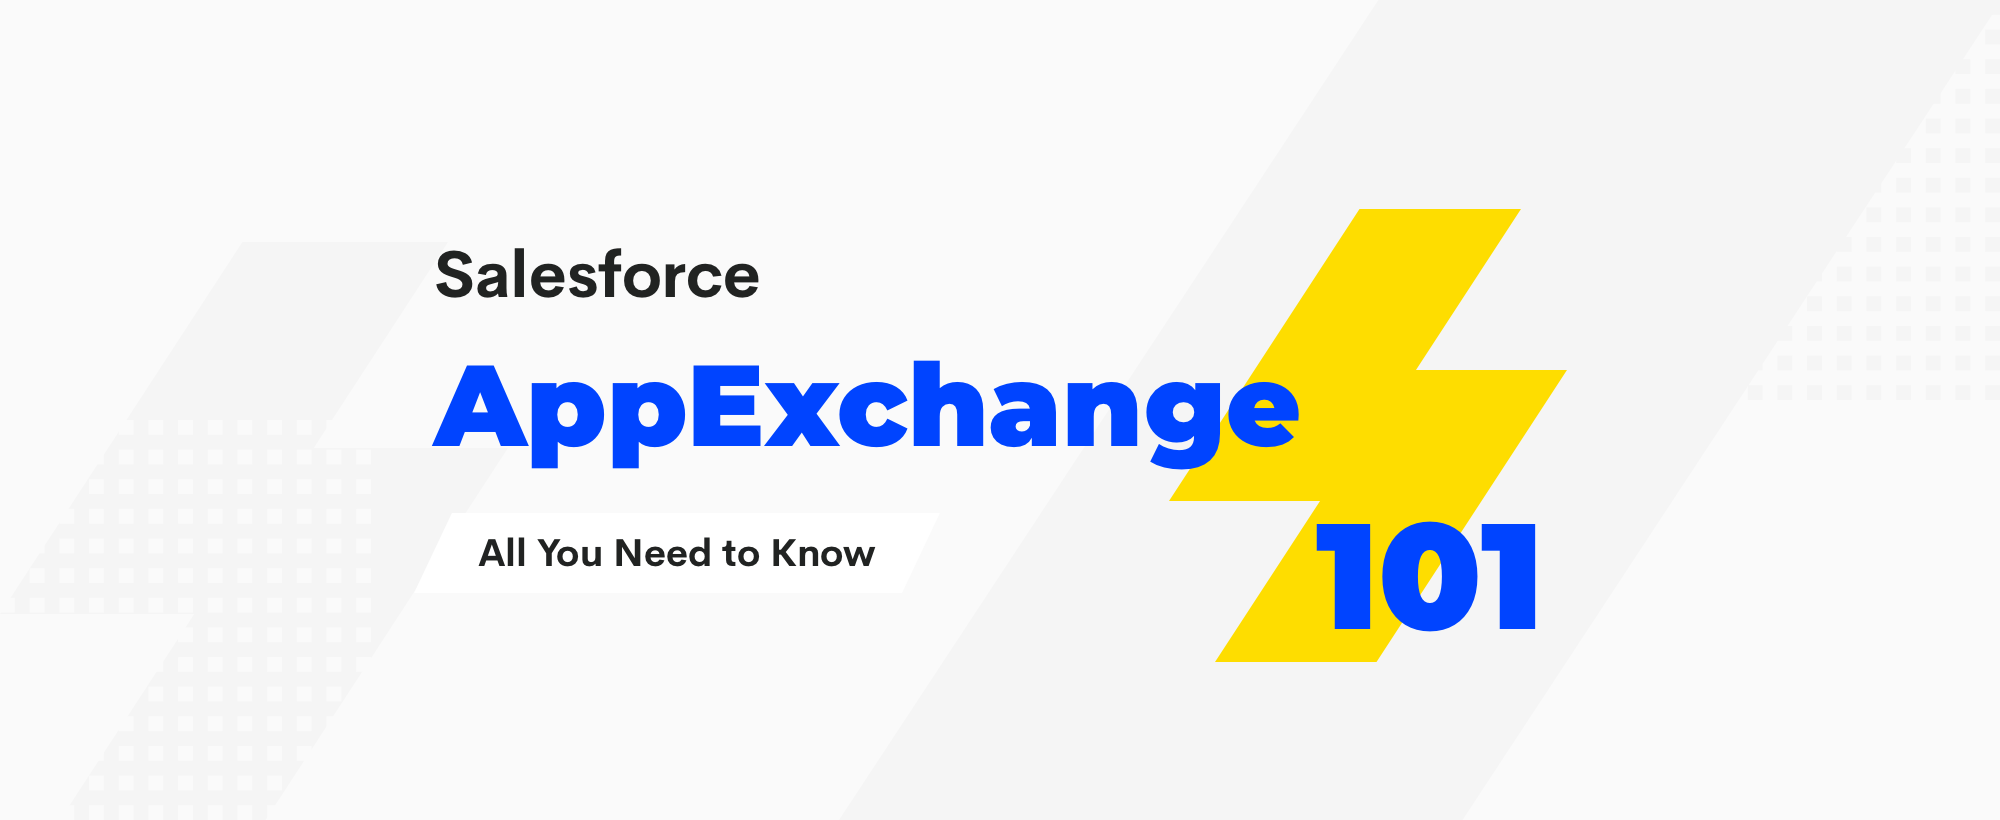 Salesforce AppExchange 101: All You Need to Know